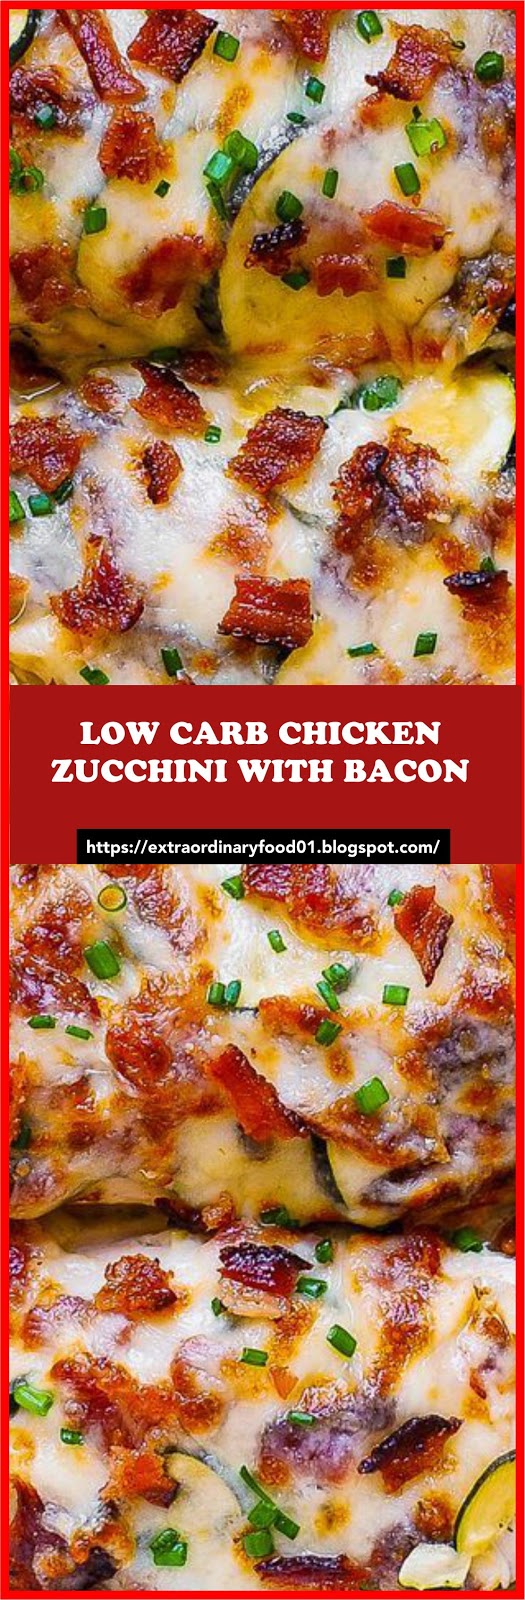 LOW CARB CHICKEN ZUCCHINI WITH BACON | Extra Ordinary Food